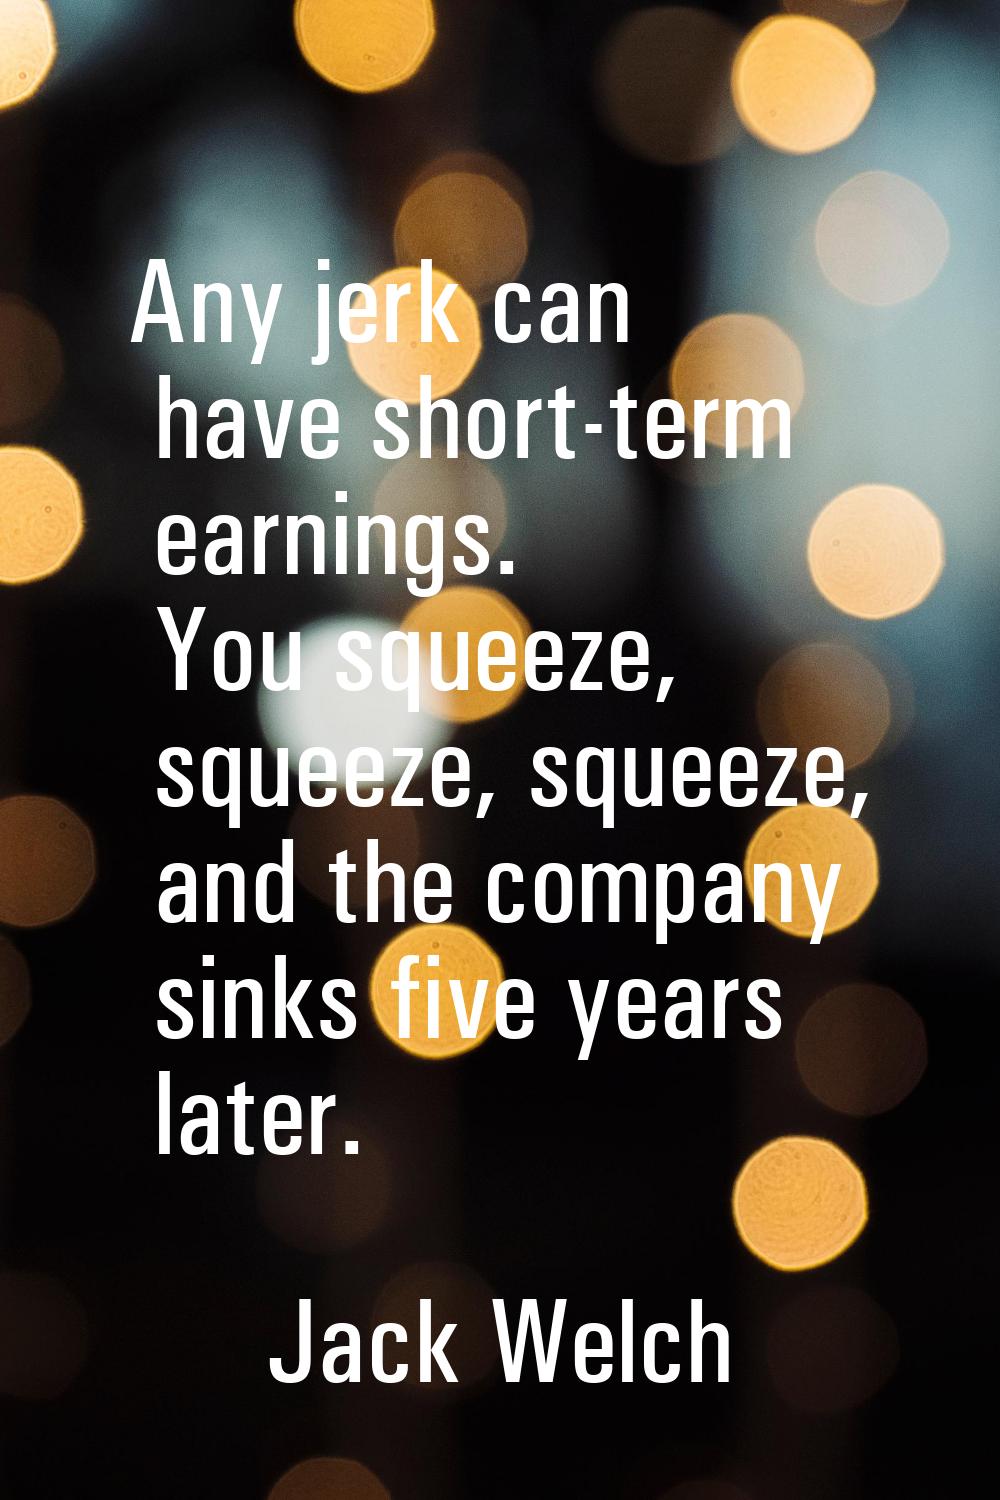 Any jerk can have short-term earnings. You squeeze, squeeze, squeeze, and the company sinks five ye